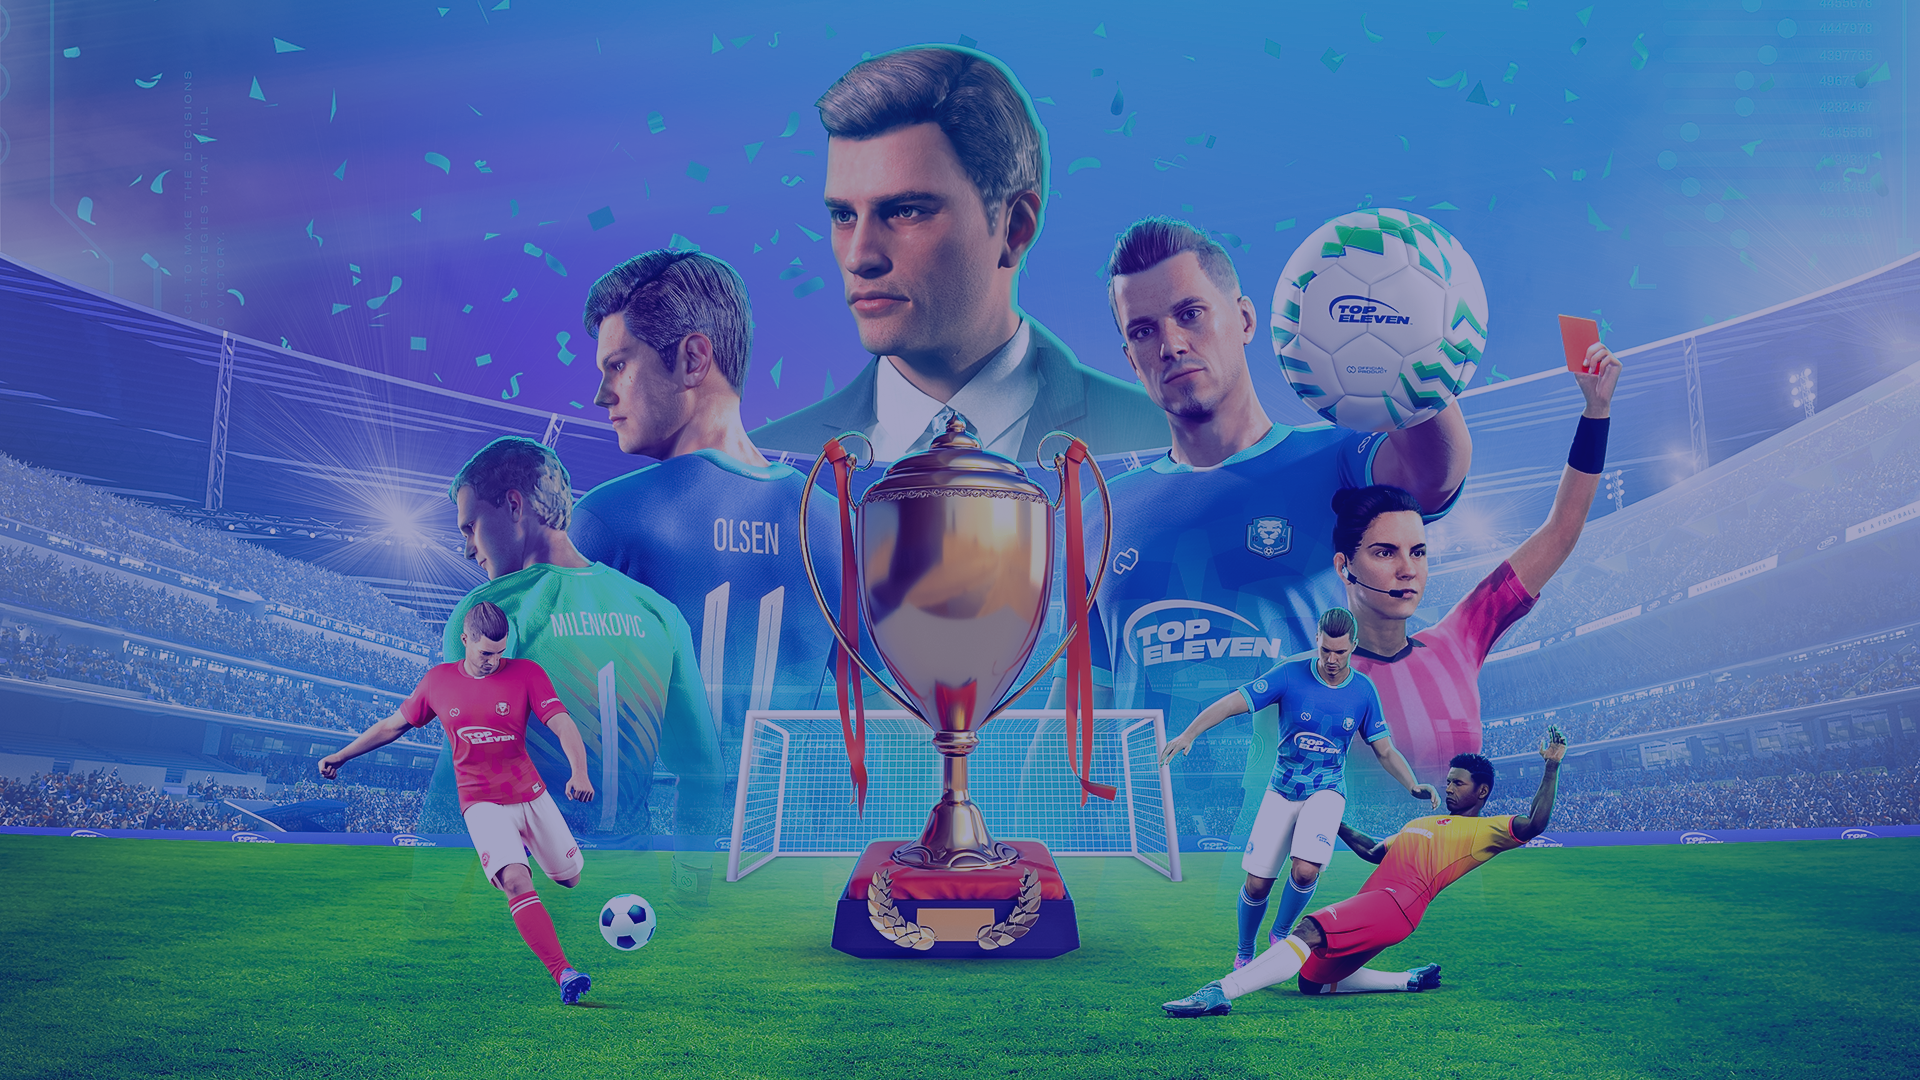 Top Football Manager Games in 2022 